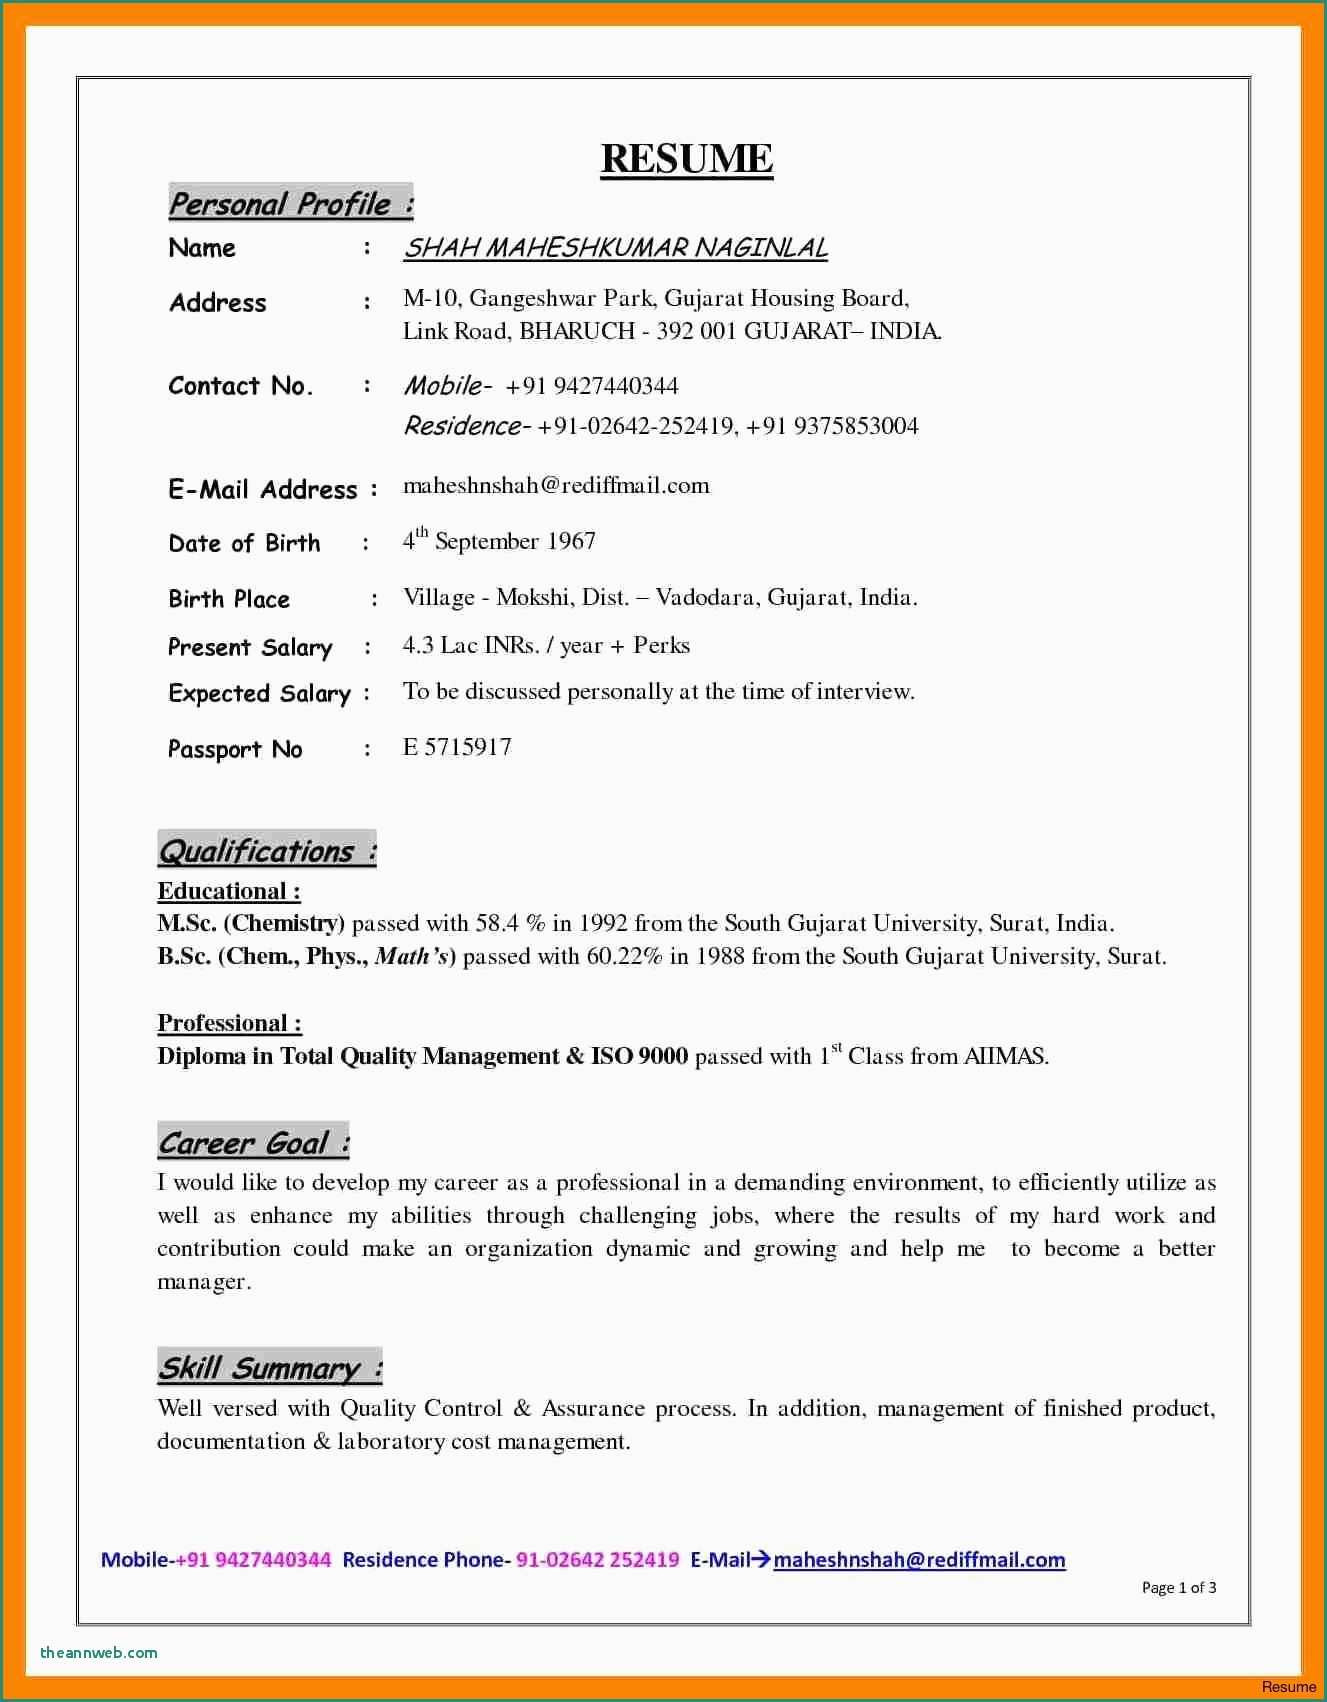 Resume Examples For Jobs Samples Of Resume Examples Job Application Letter Format In Gujarati How Write A Resume For A Of Samples Of Resume resume examples for jobs|wikiresume.com